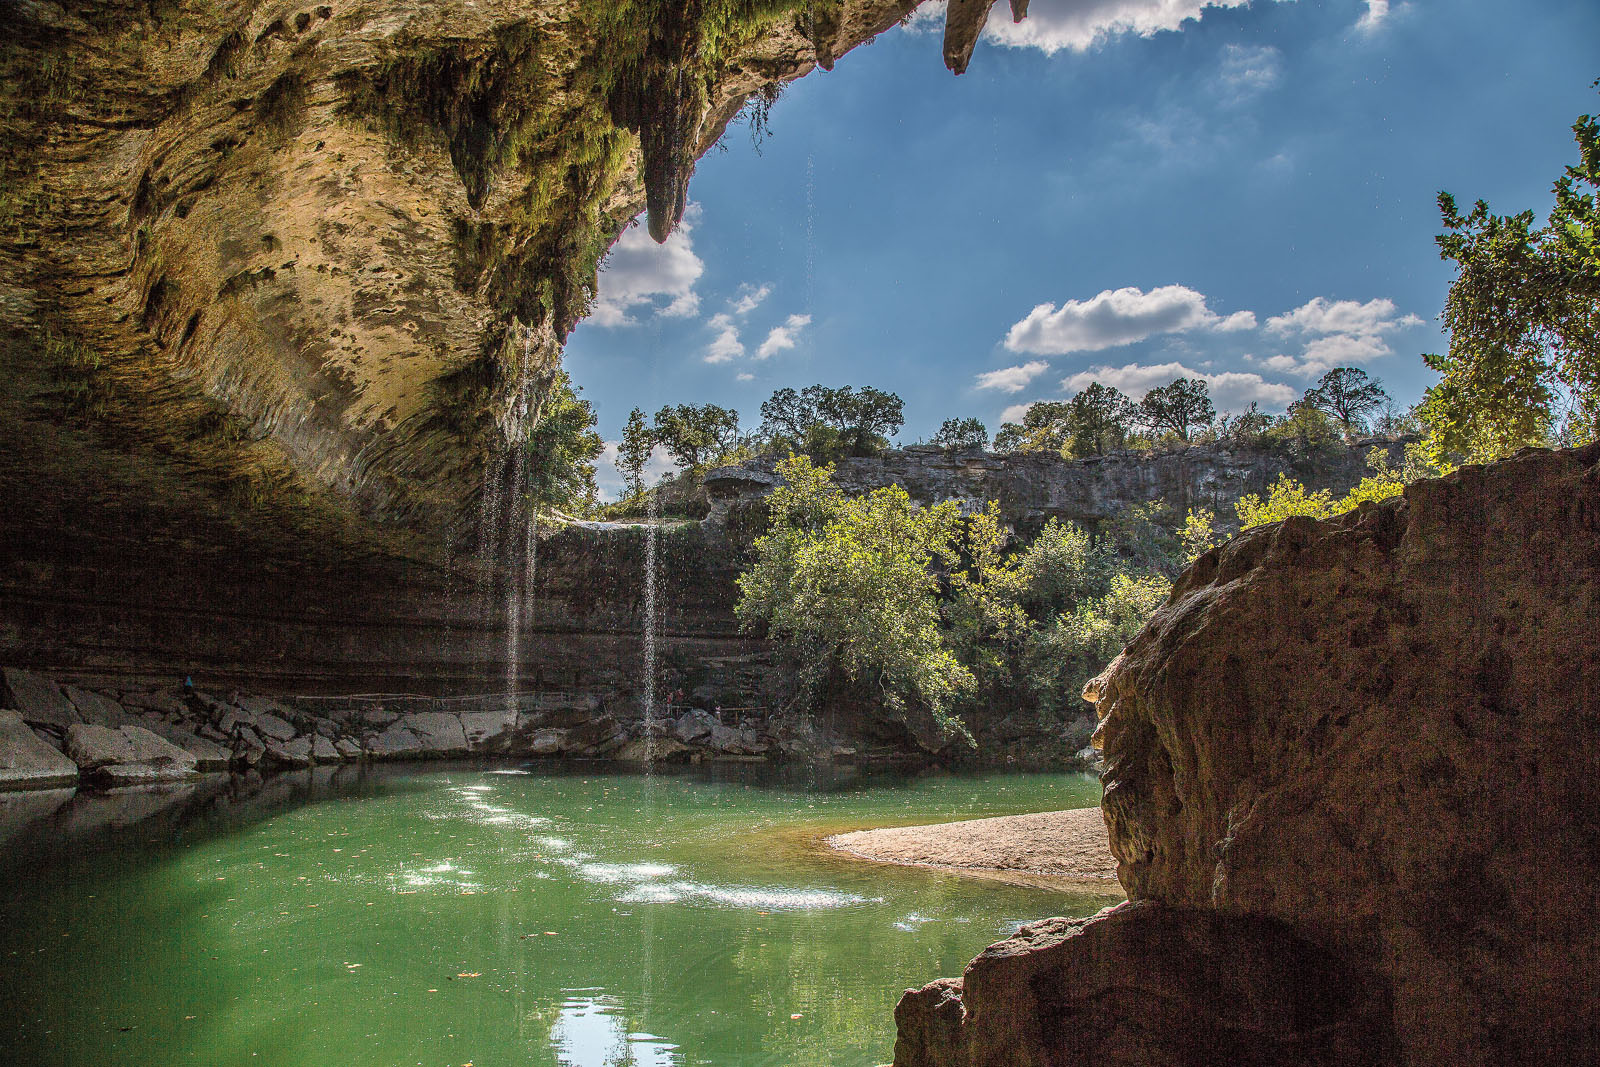 Blue sky and green water of Hamilton Pool